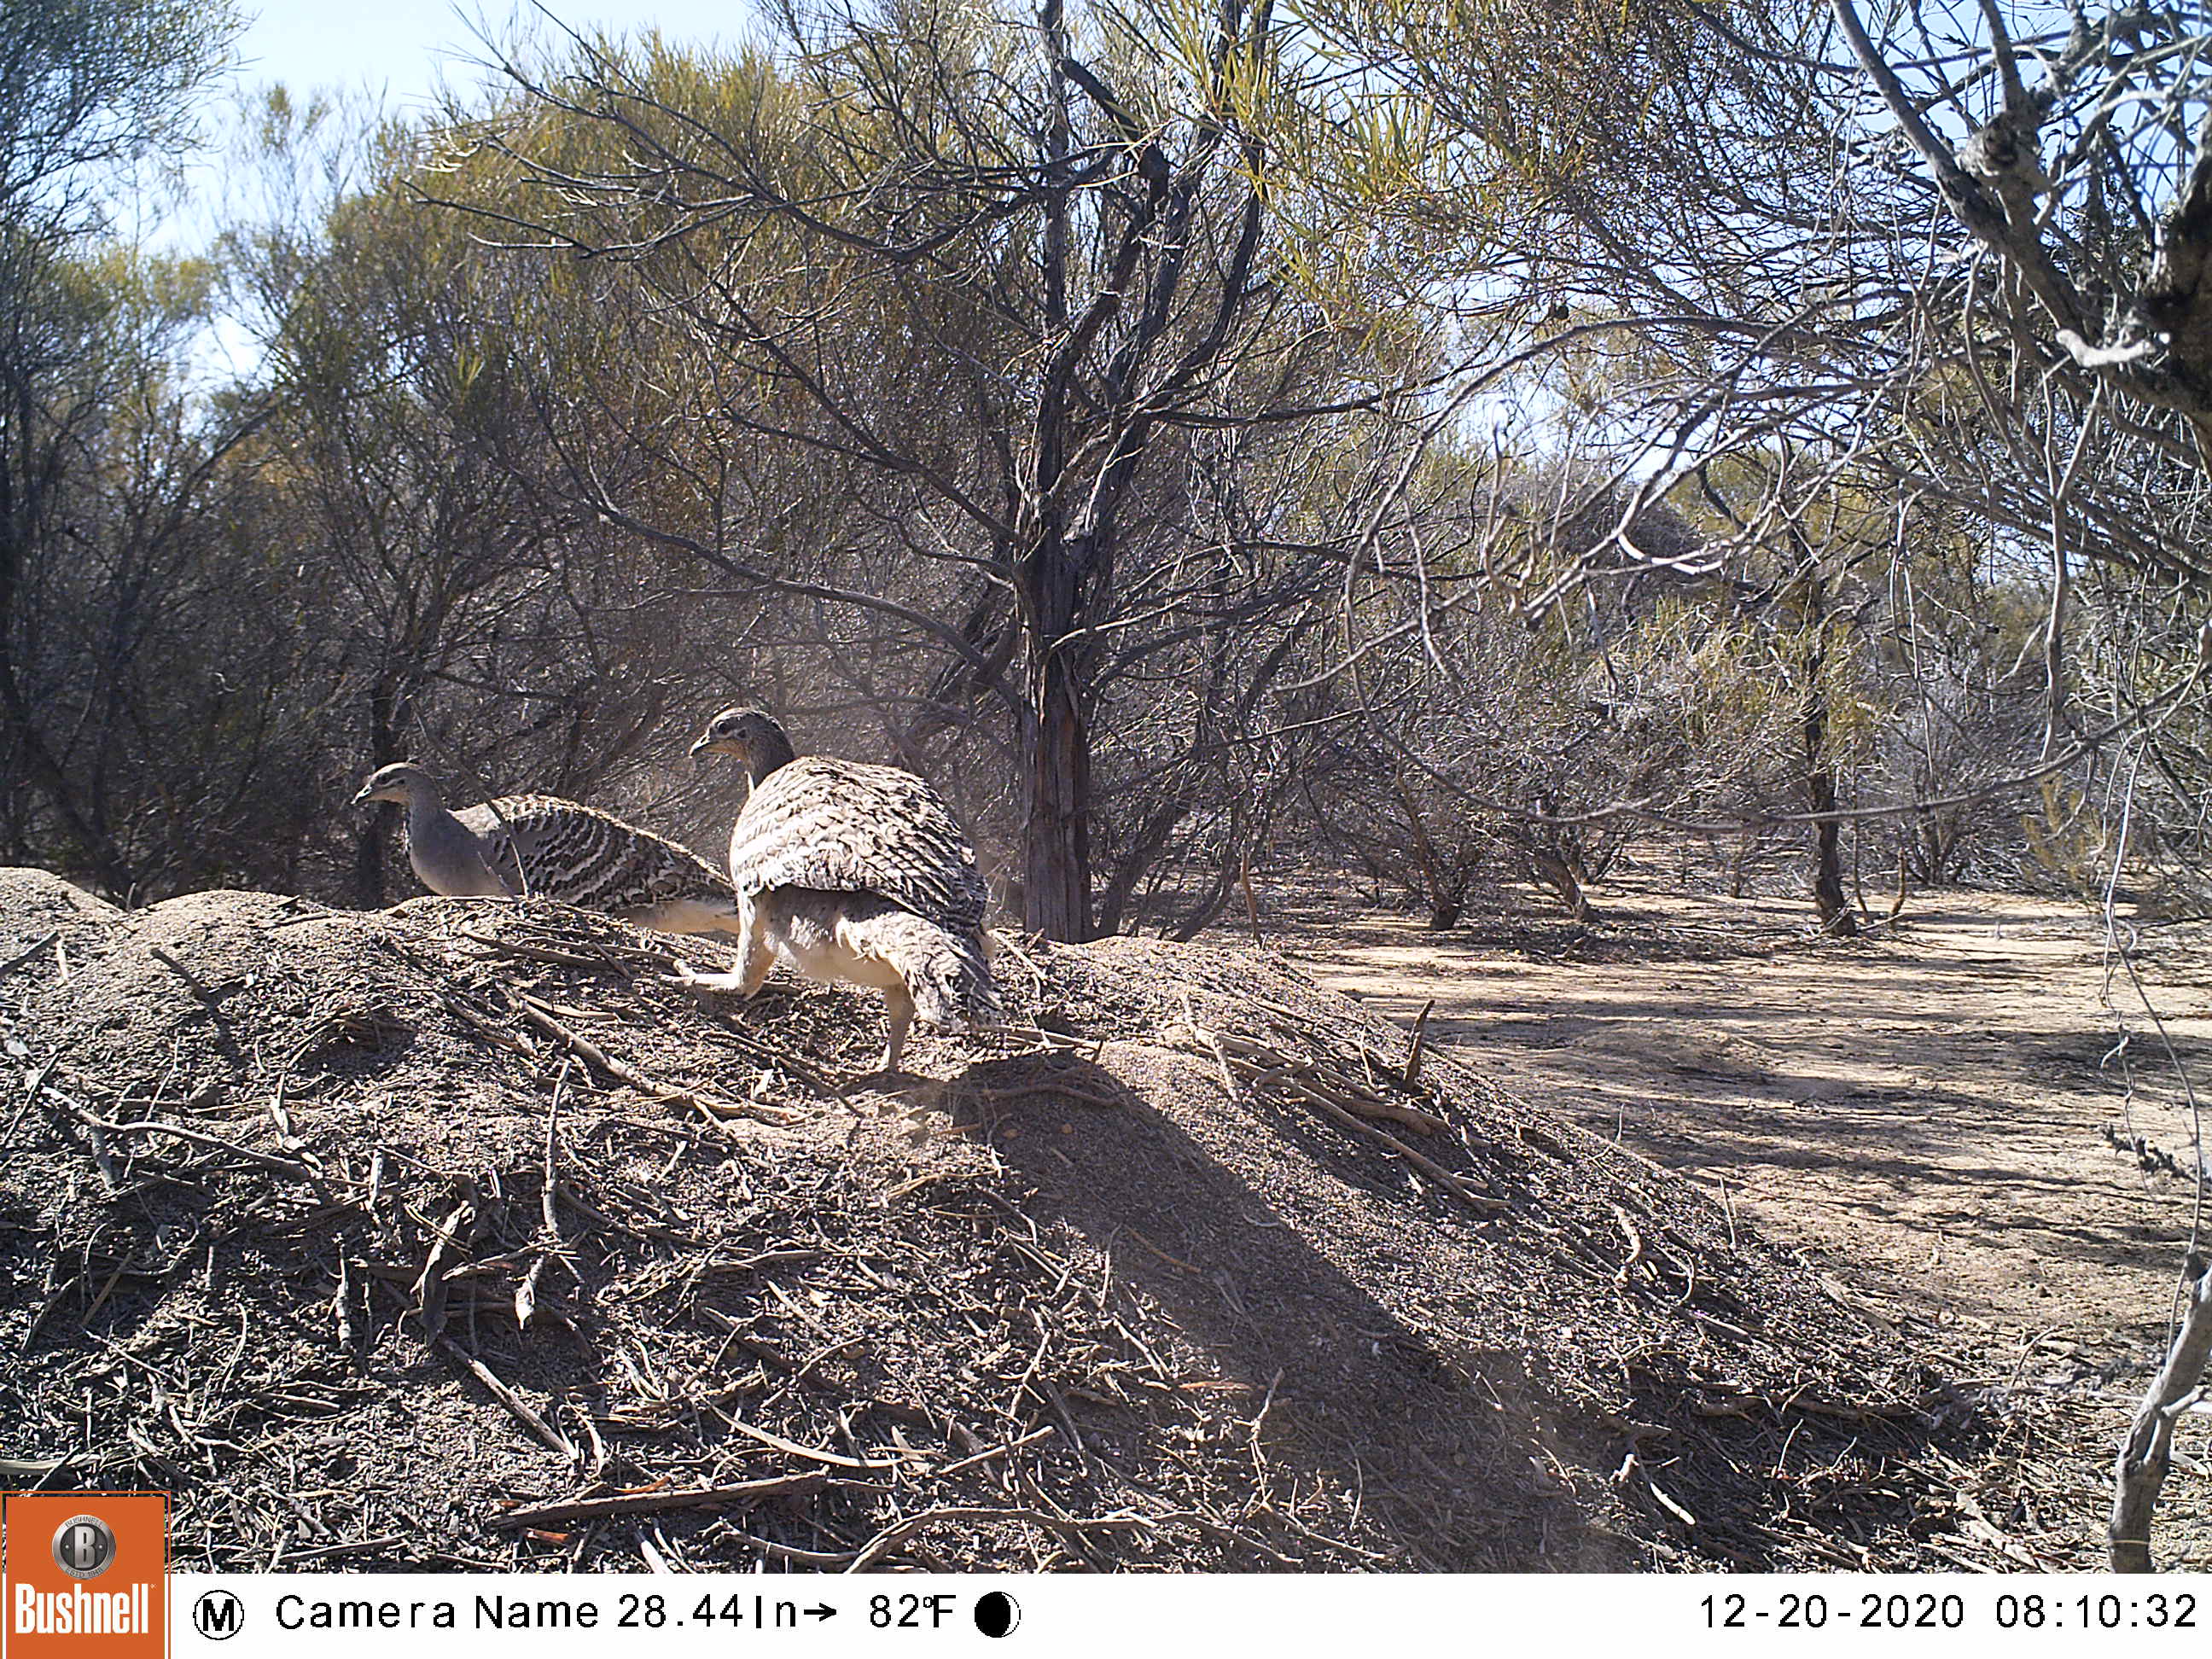 Malleefowl captured on camera tending to a mound in the Wheatbelt